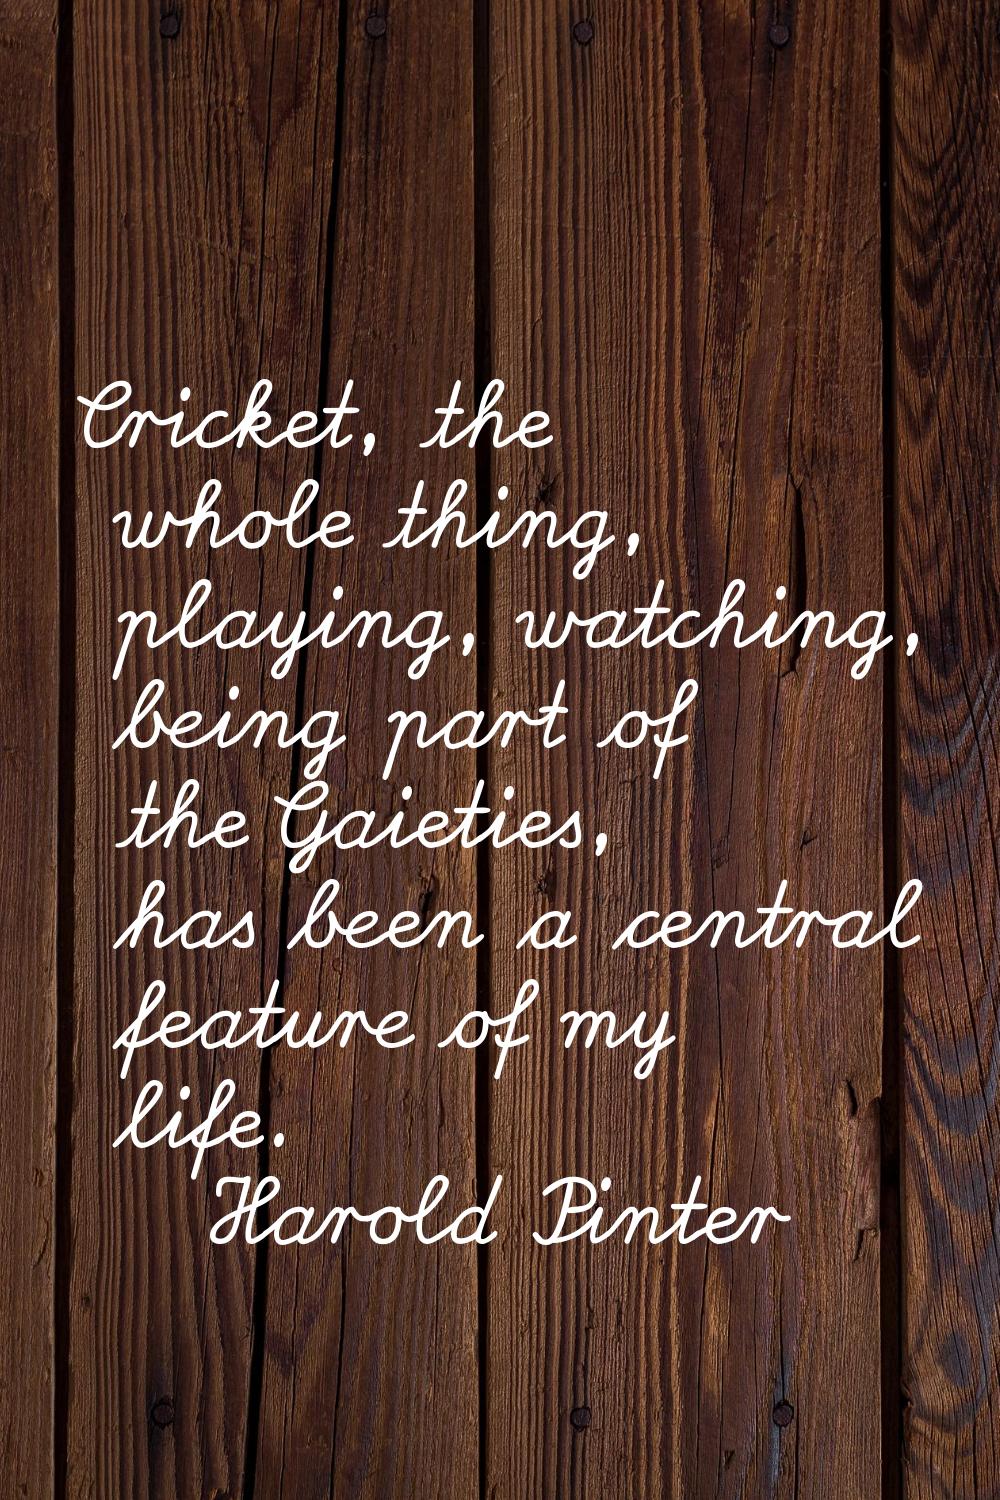 Cricket, the whole thing, playing, watching, being part of the Gaieties, has been a central feature